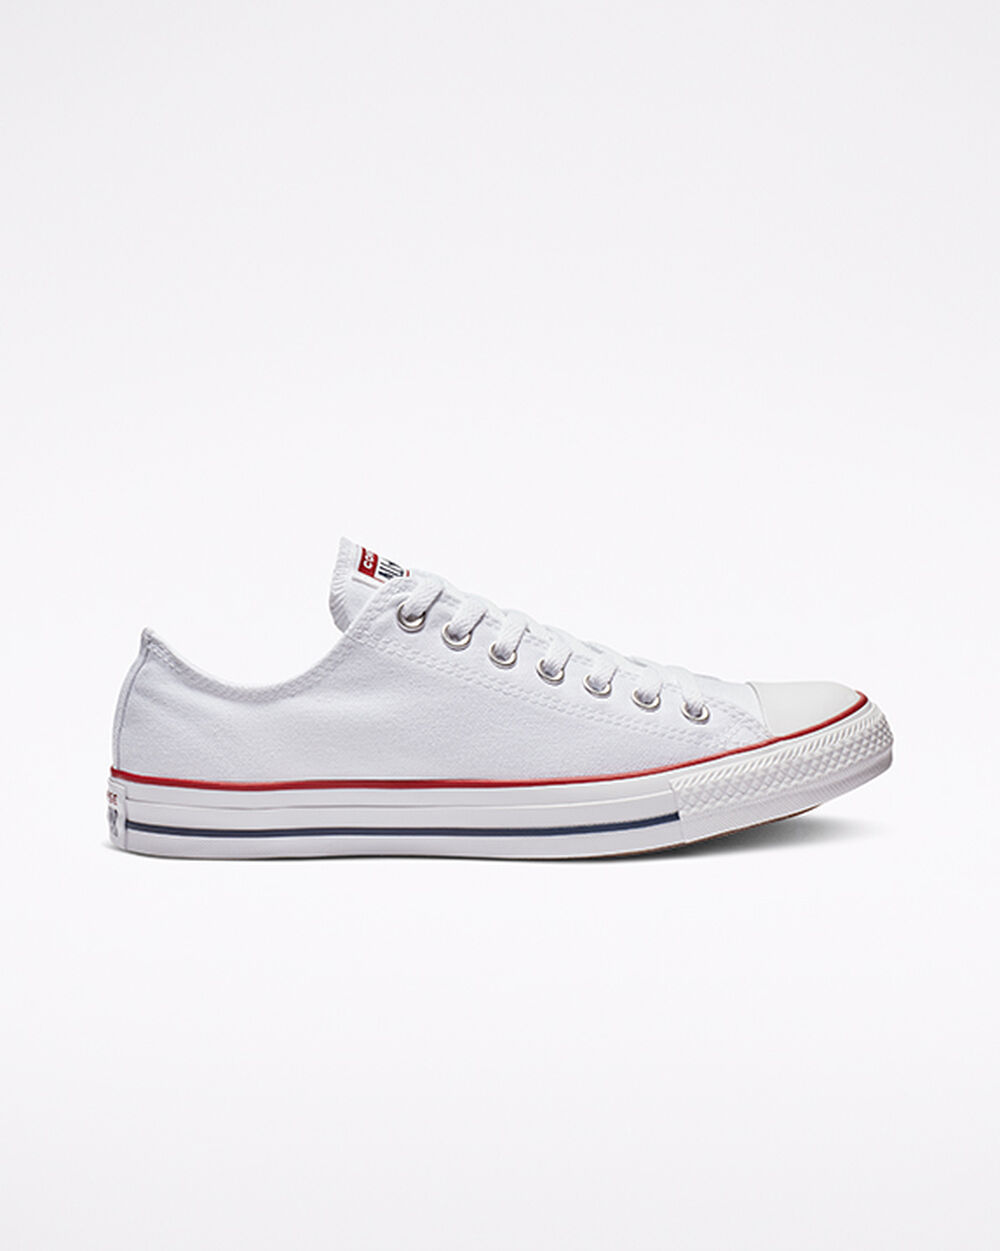 Tenis Converse Chuck Taylor All Star Mujer Blancos | Mexico-468316